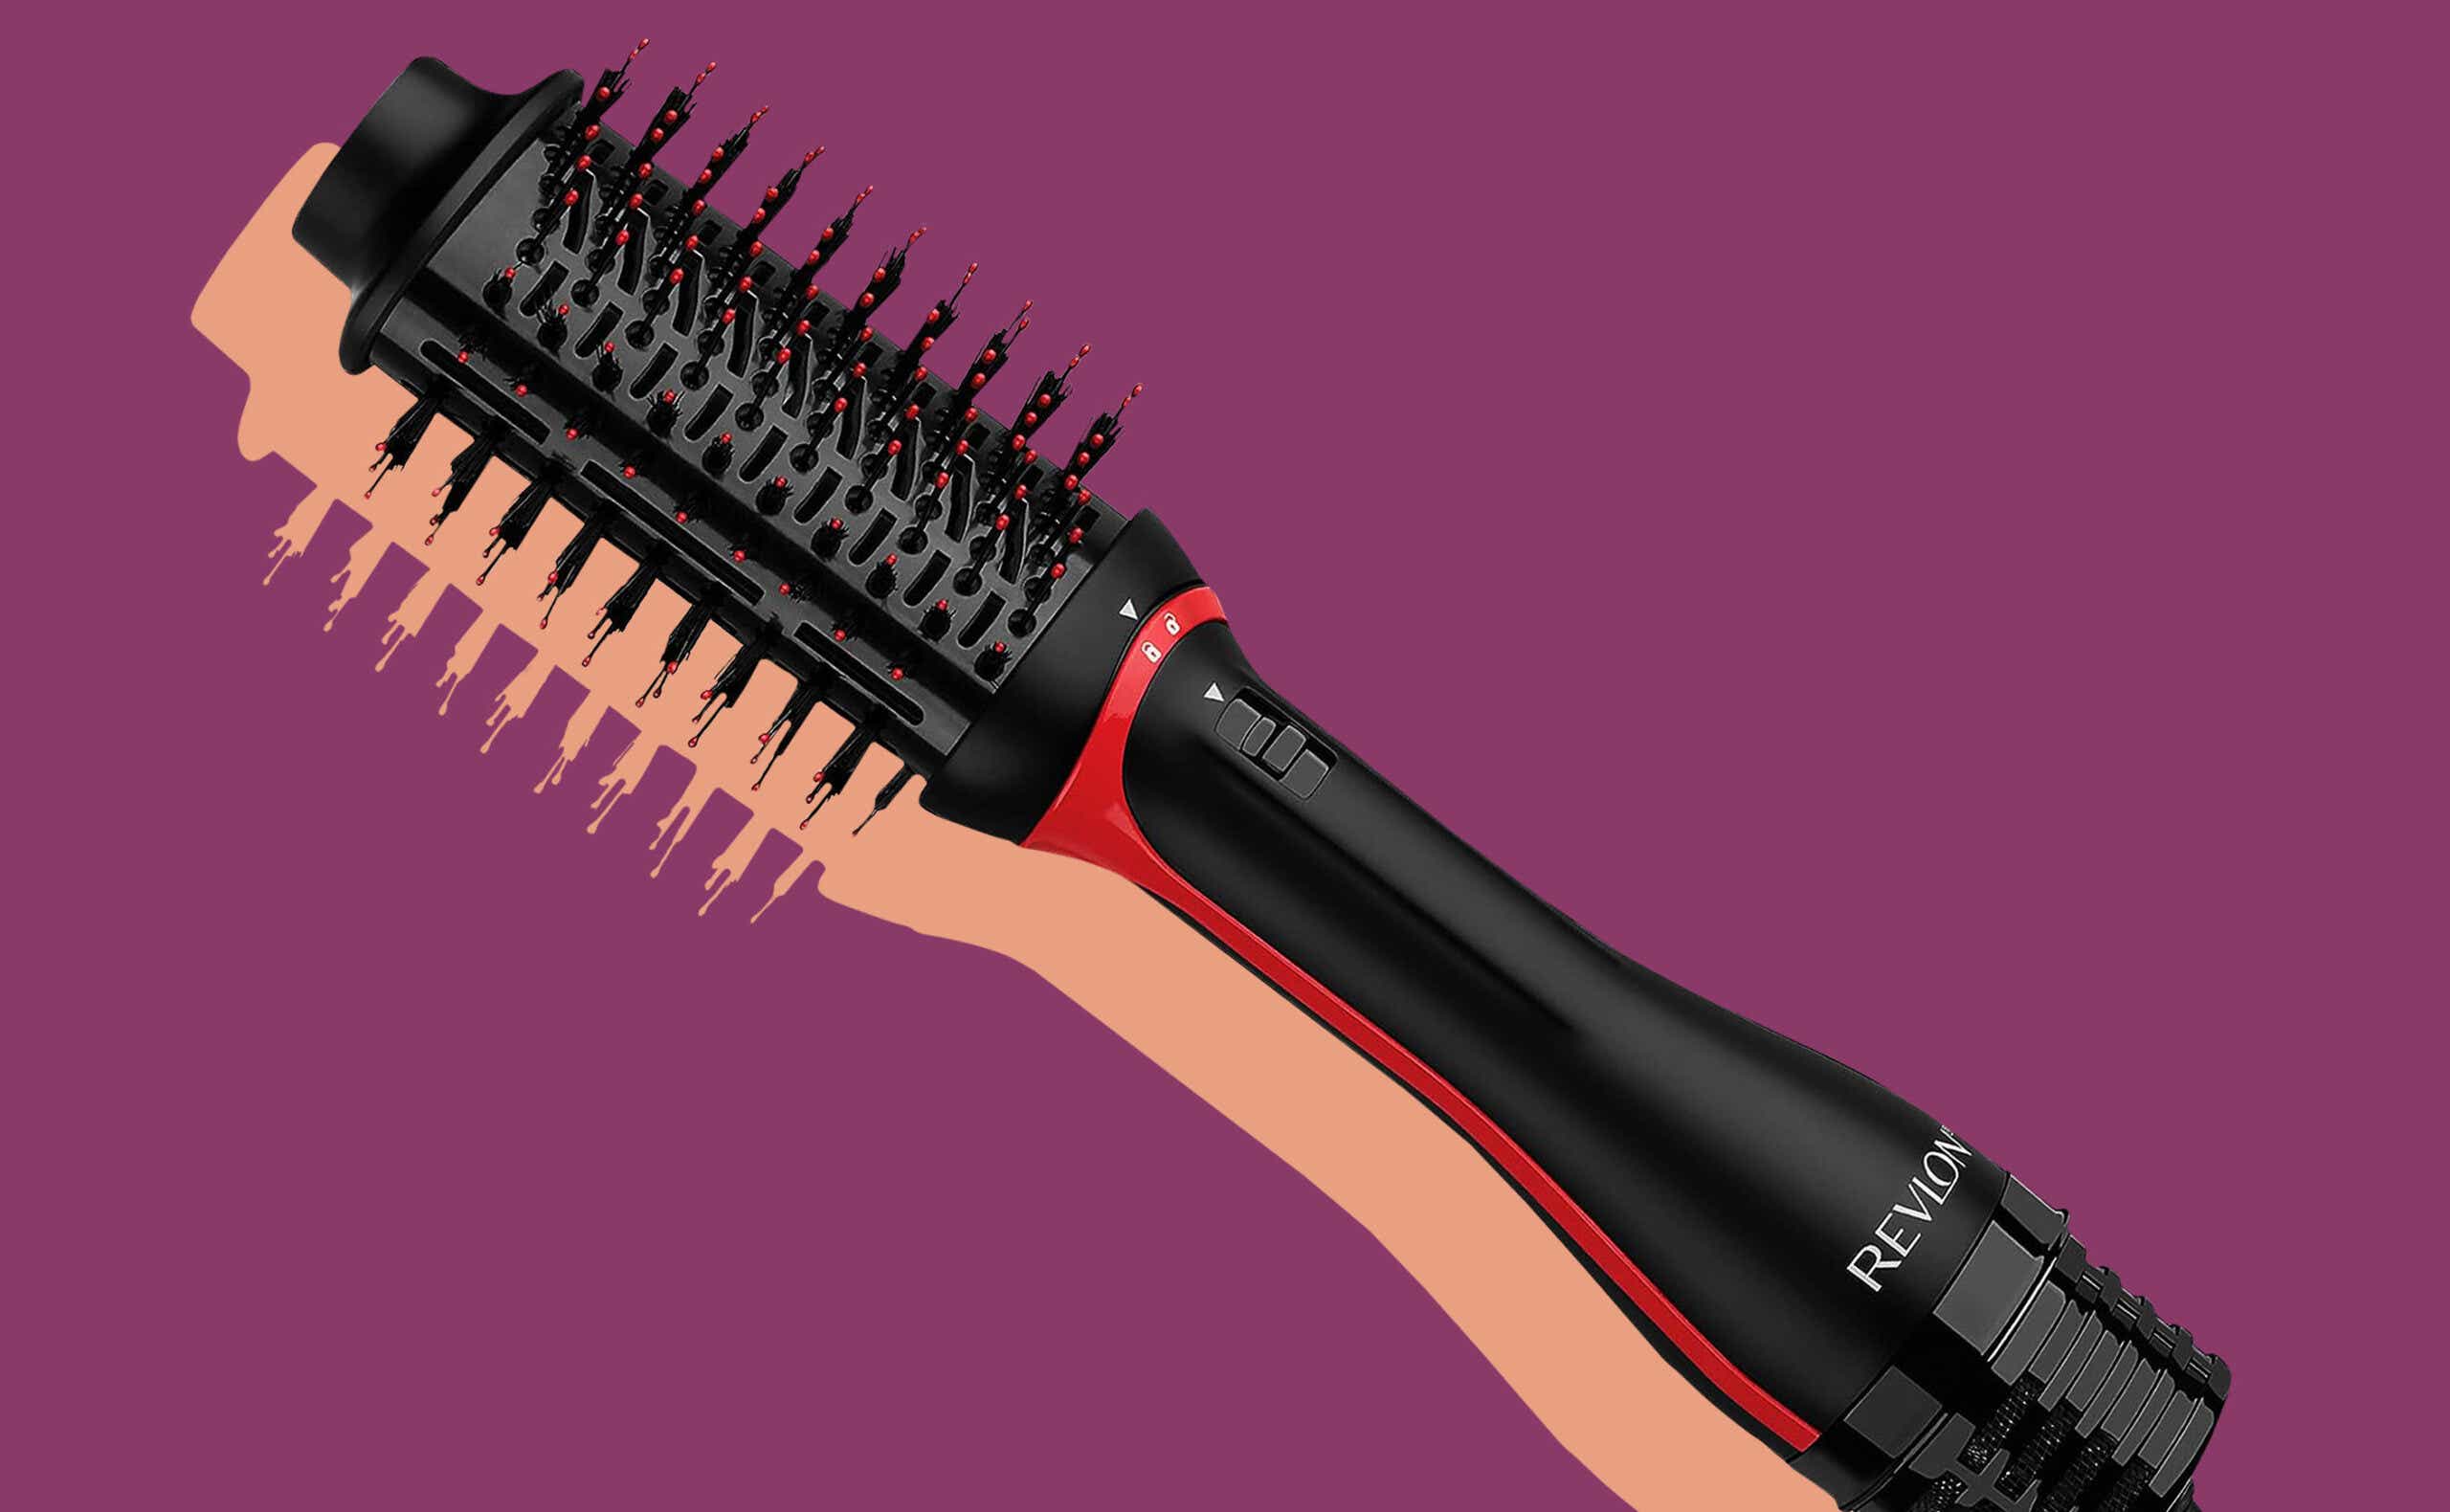 Revlon Blow Dryer Brush Editor Review & How to Use It